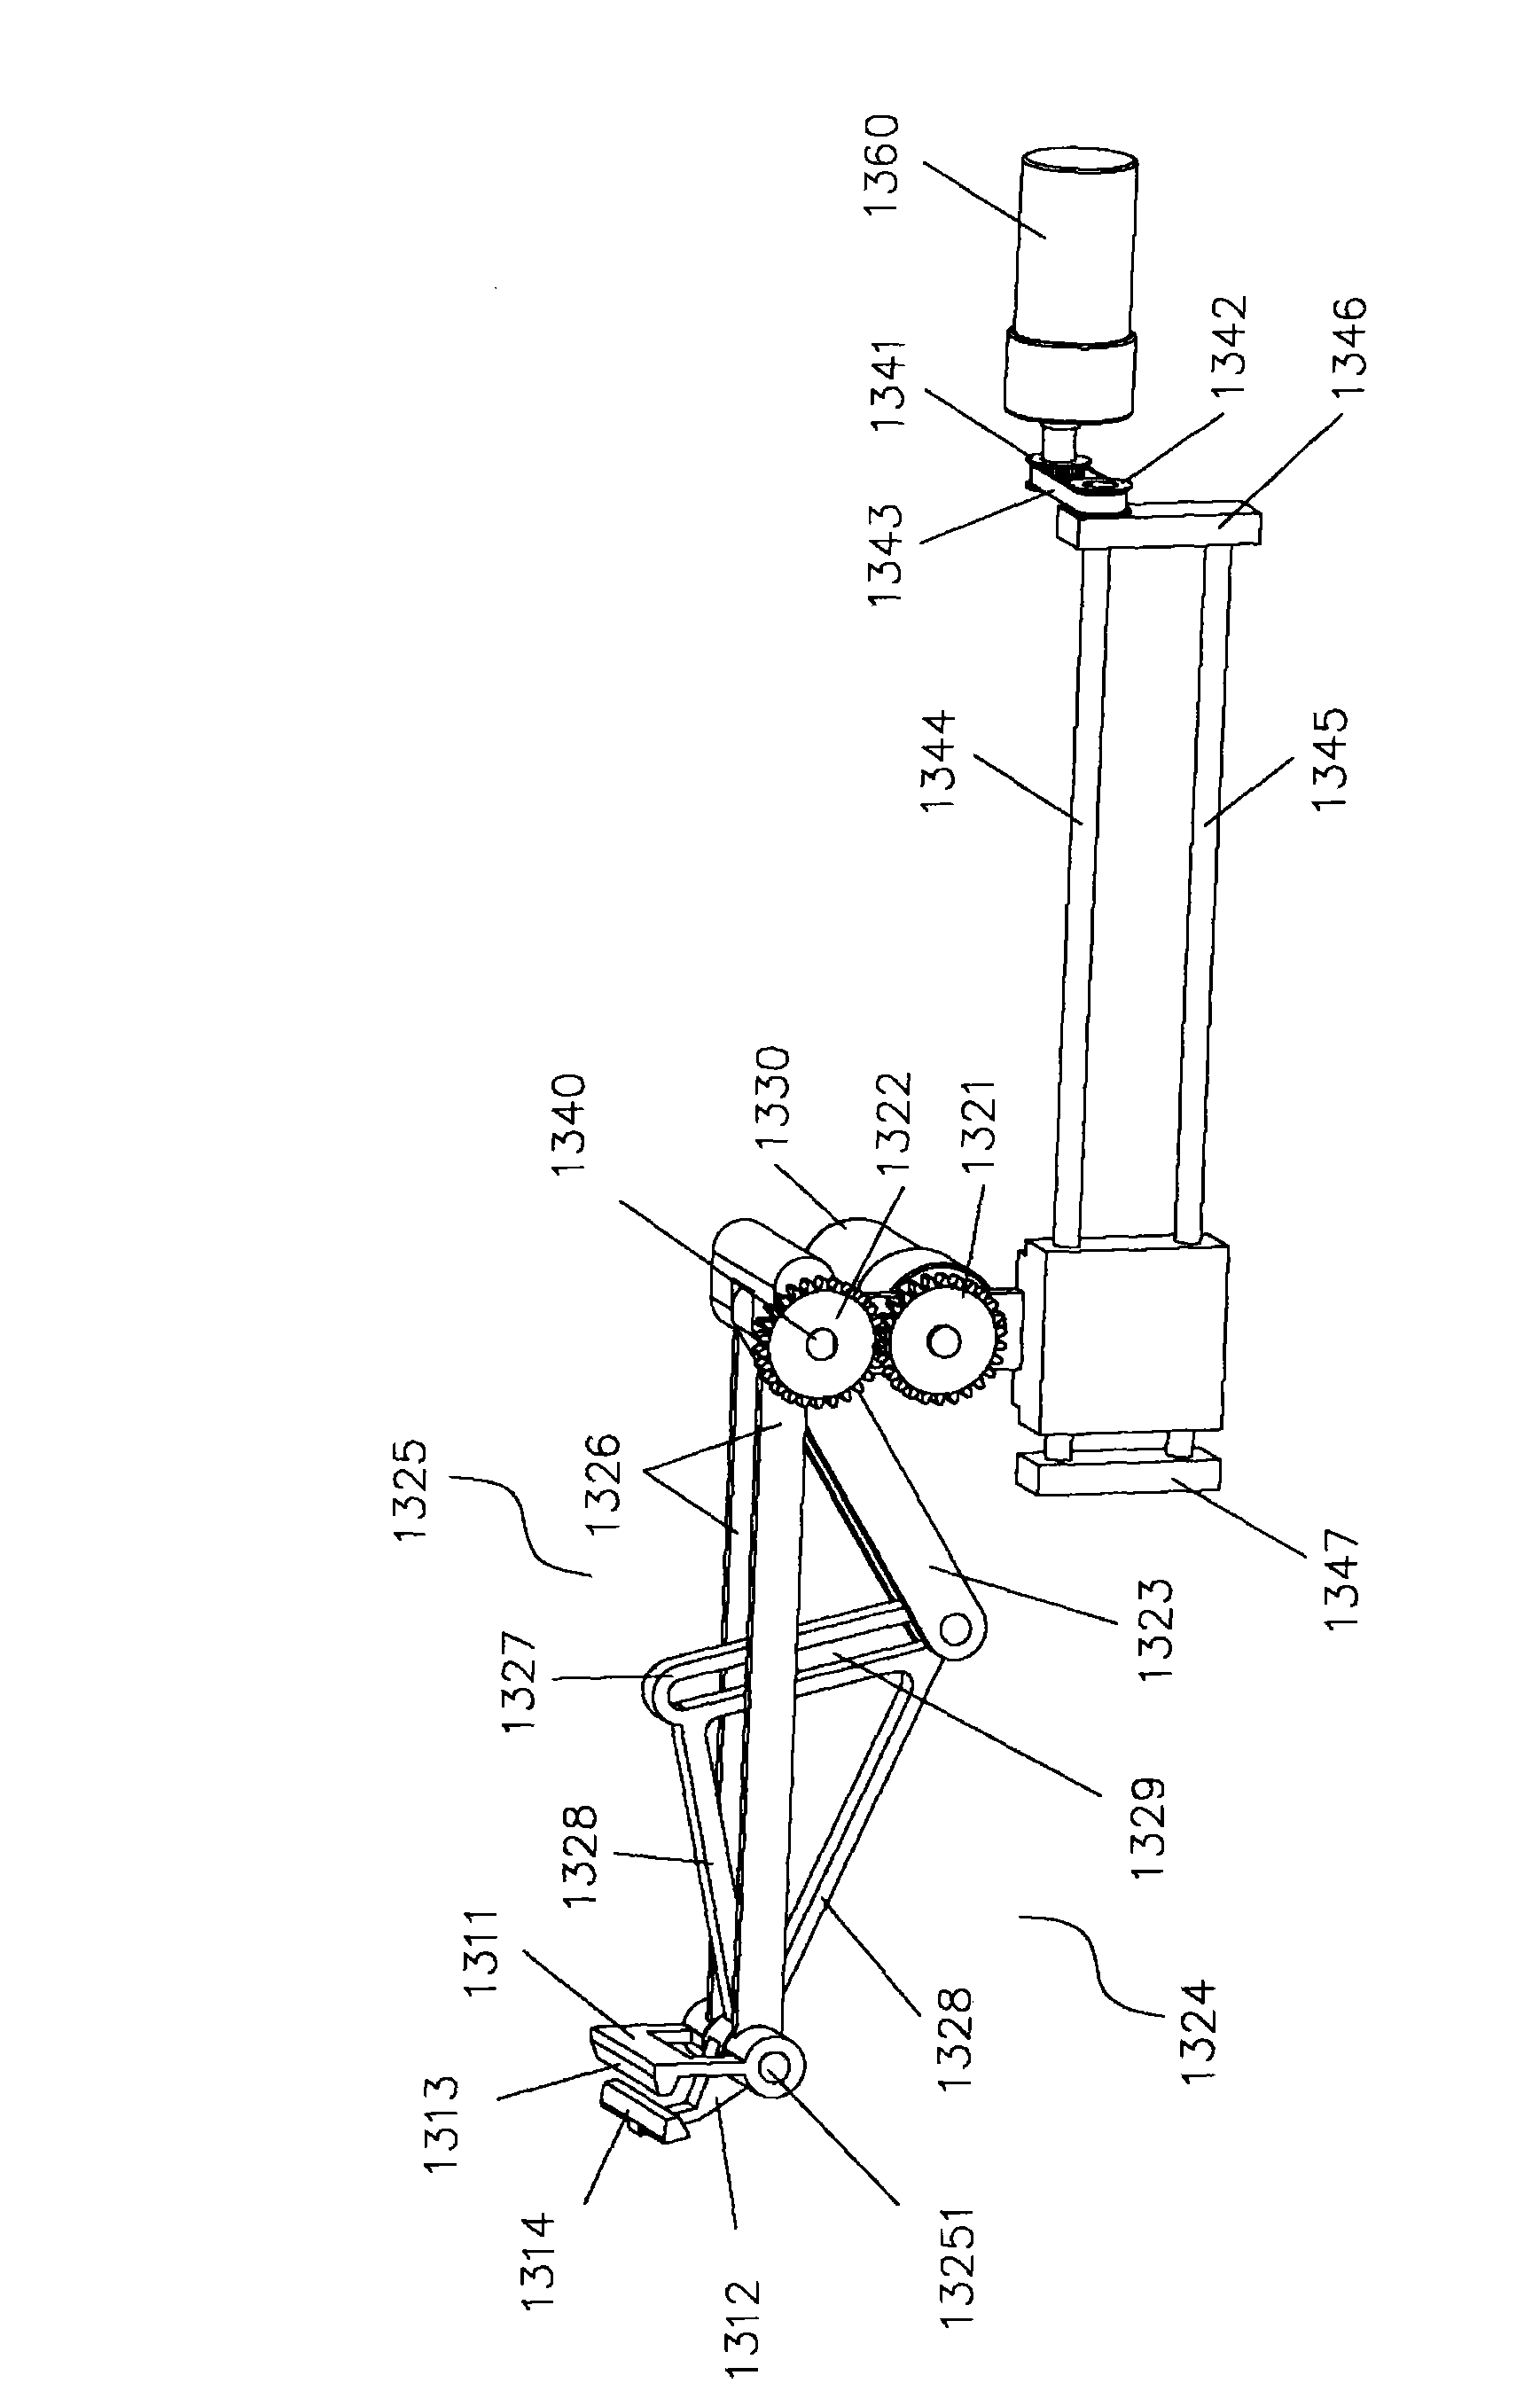 Clamping, pouring and conveying mechanism and cooking material feeding system and method